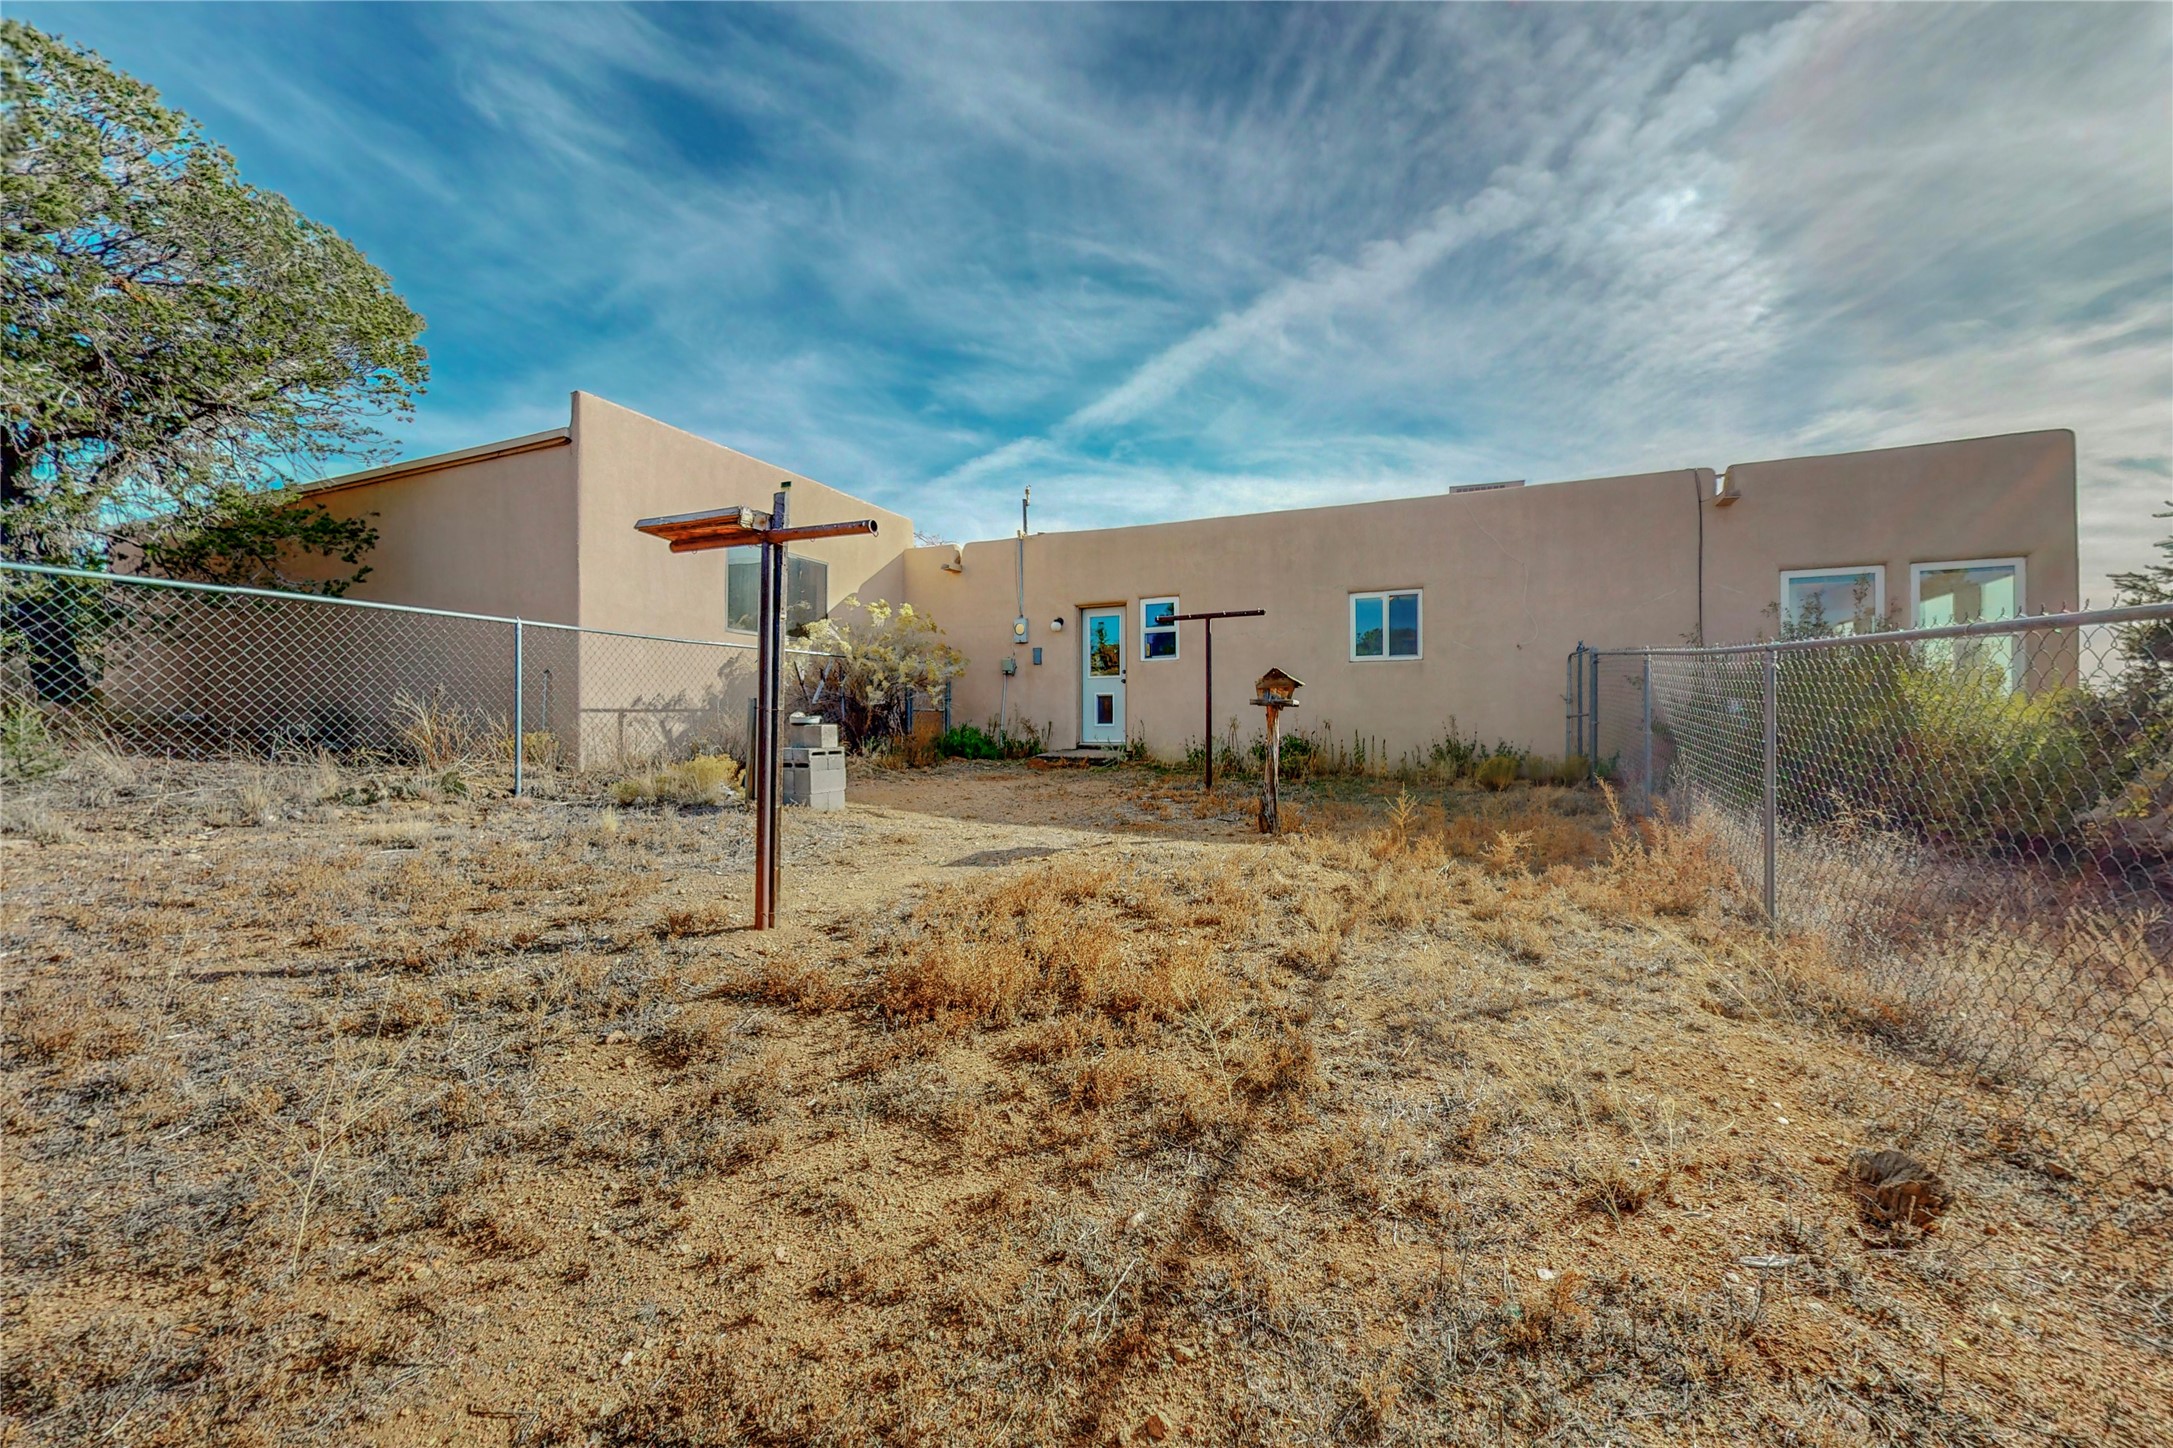 34 Ute Circle, Santa Fe, New Mexico 87505, 2 Bedrooms Bedrooms, ,2 BathroomsBathrooms,Residential,For Sale,34 Ute Circle,202341832